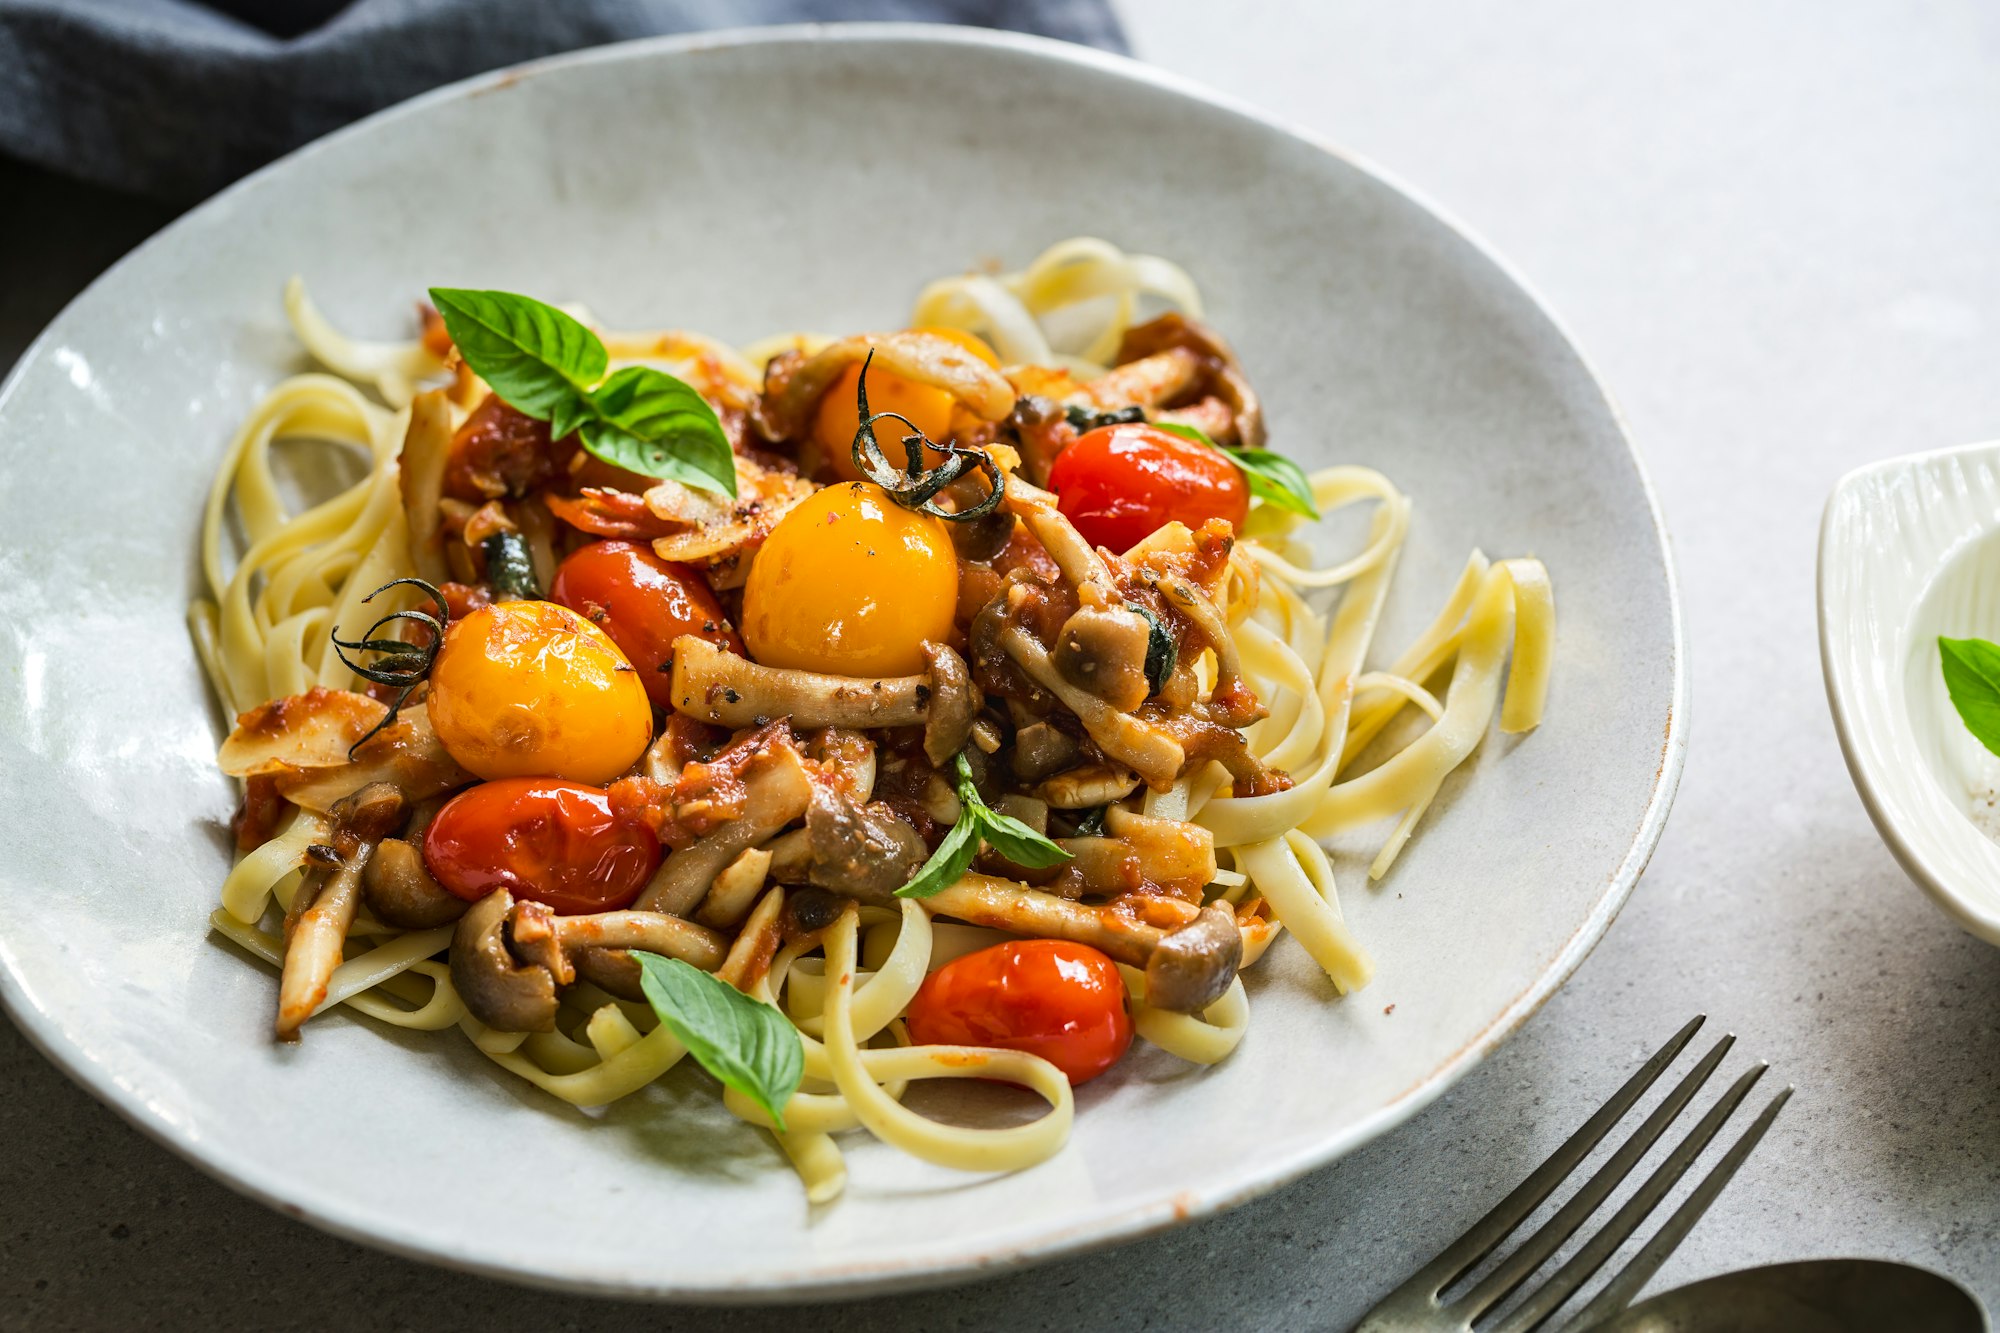 Fettuccine with Mushroom and Tomatoes sauce